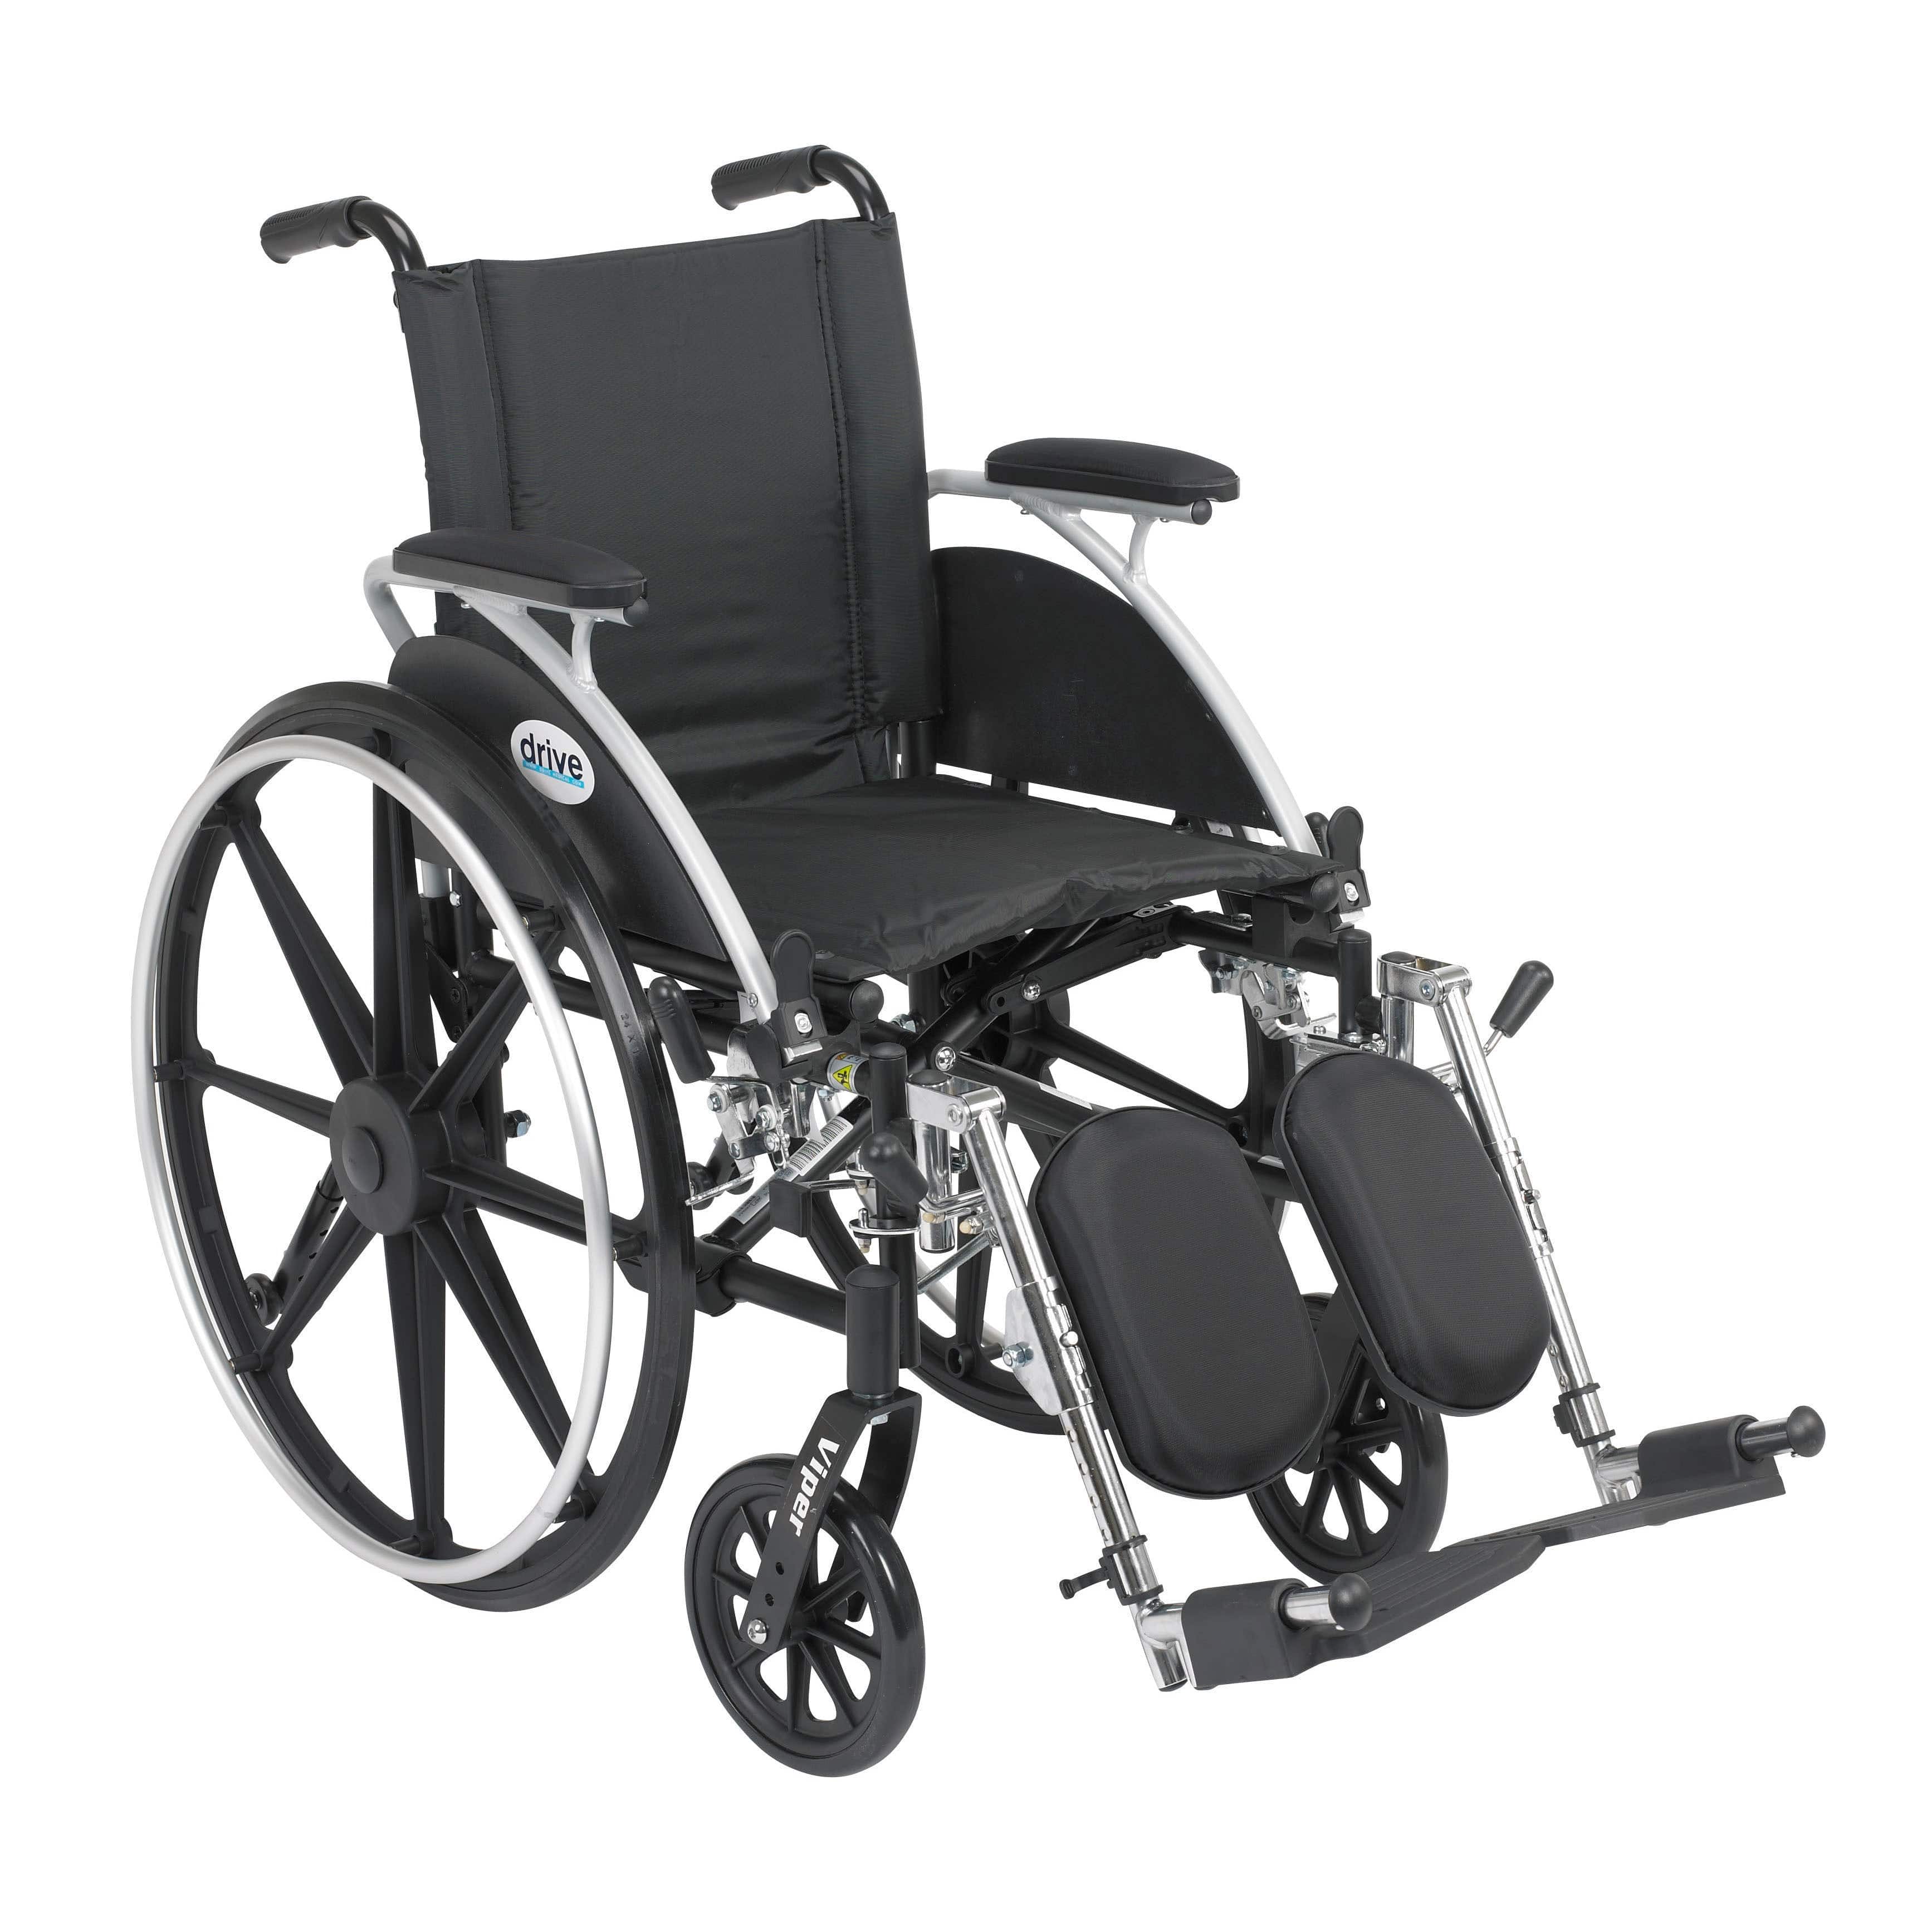 Drive Medical Wheelchairs Flip Back Removable Desk Arms and Elevating Leg Rests / 12" Seat Drive Medical Viper Wheelchair with Flip Back Removable Arms